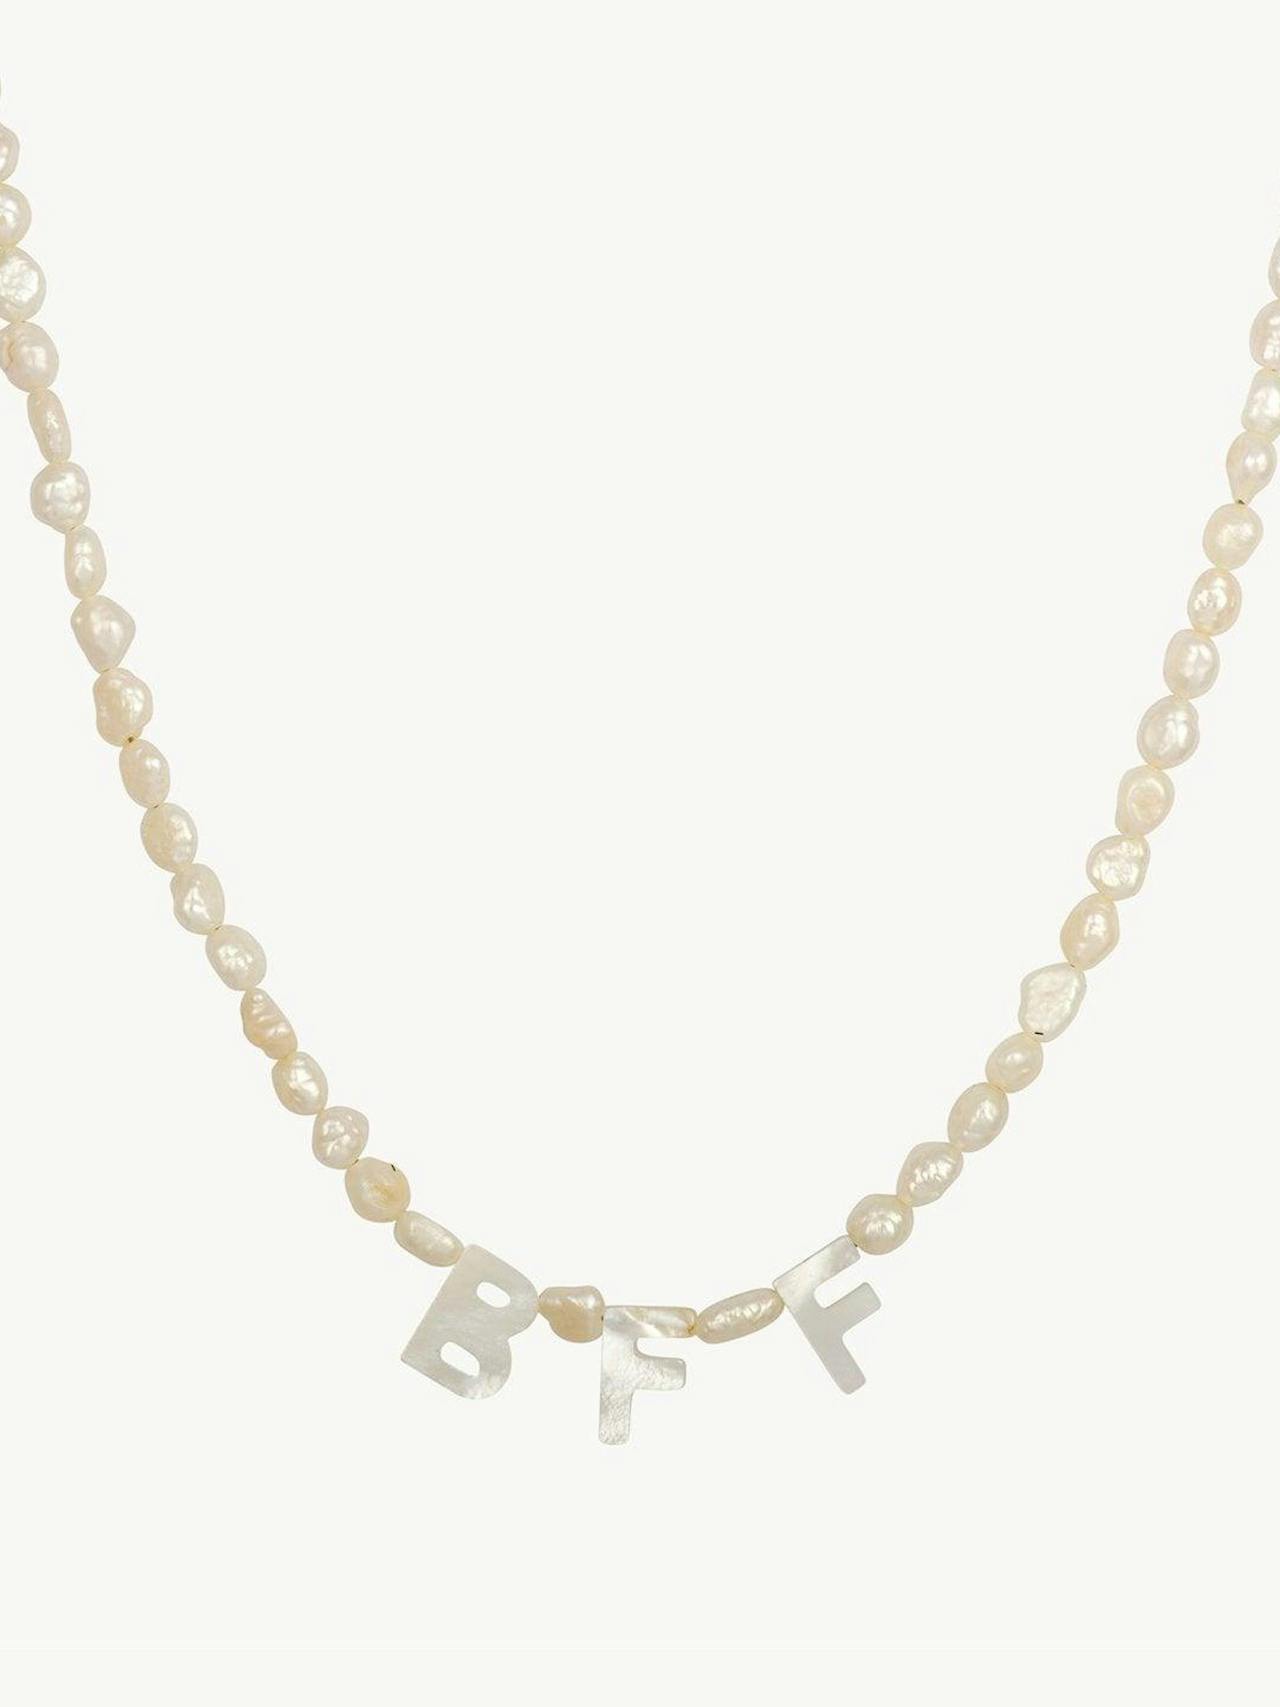 BFF necklace